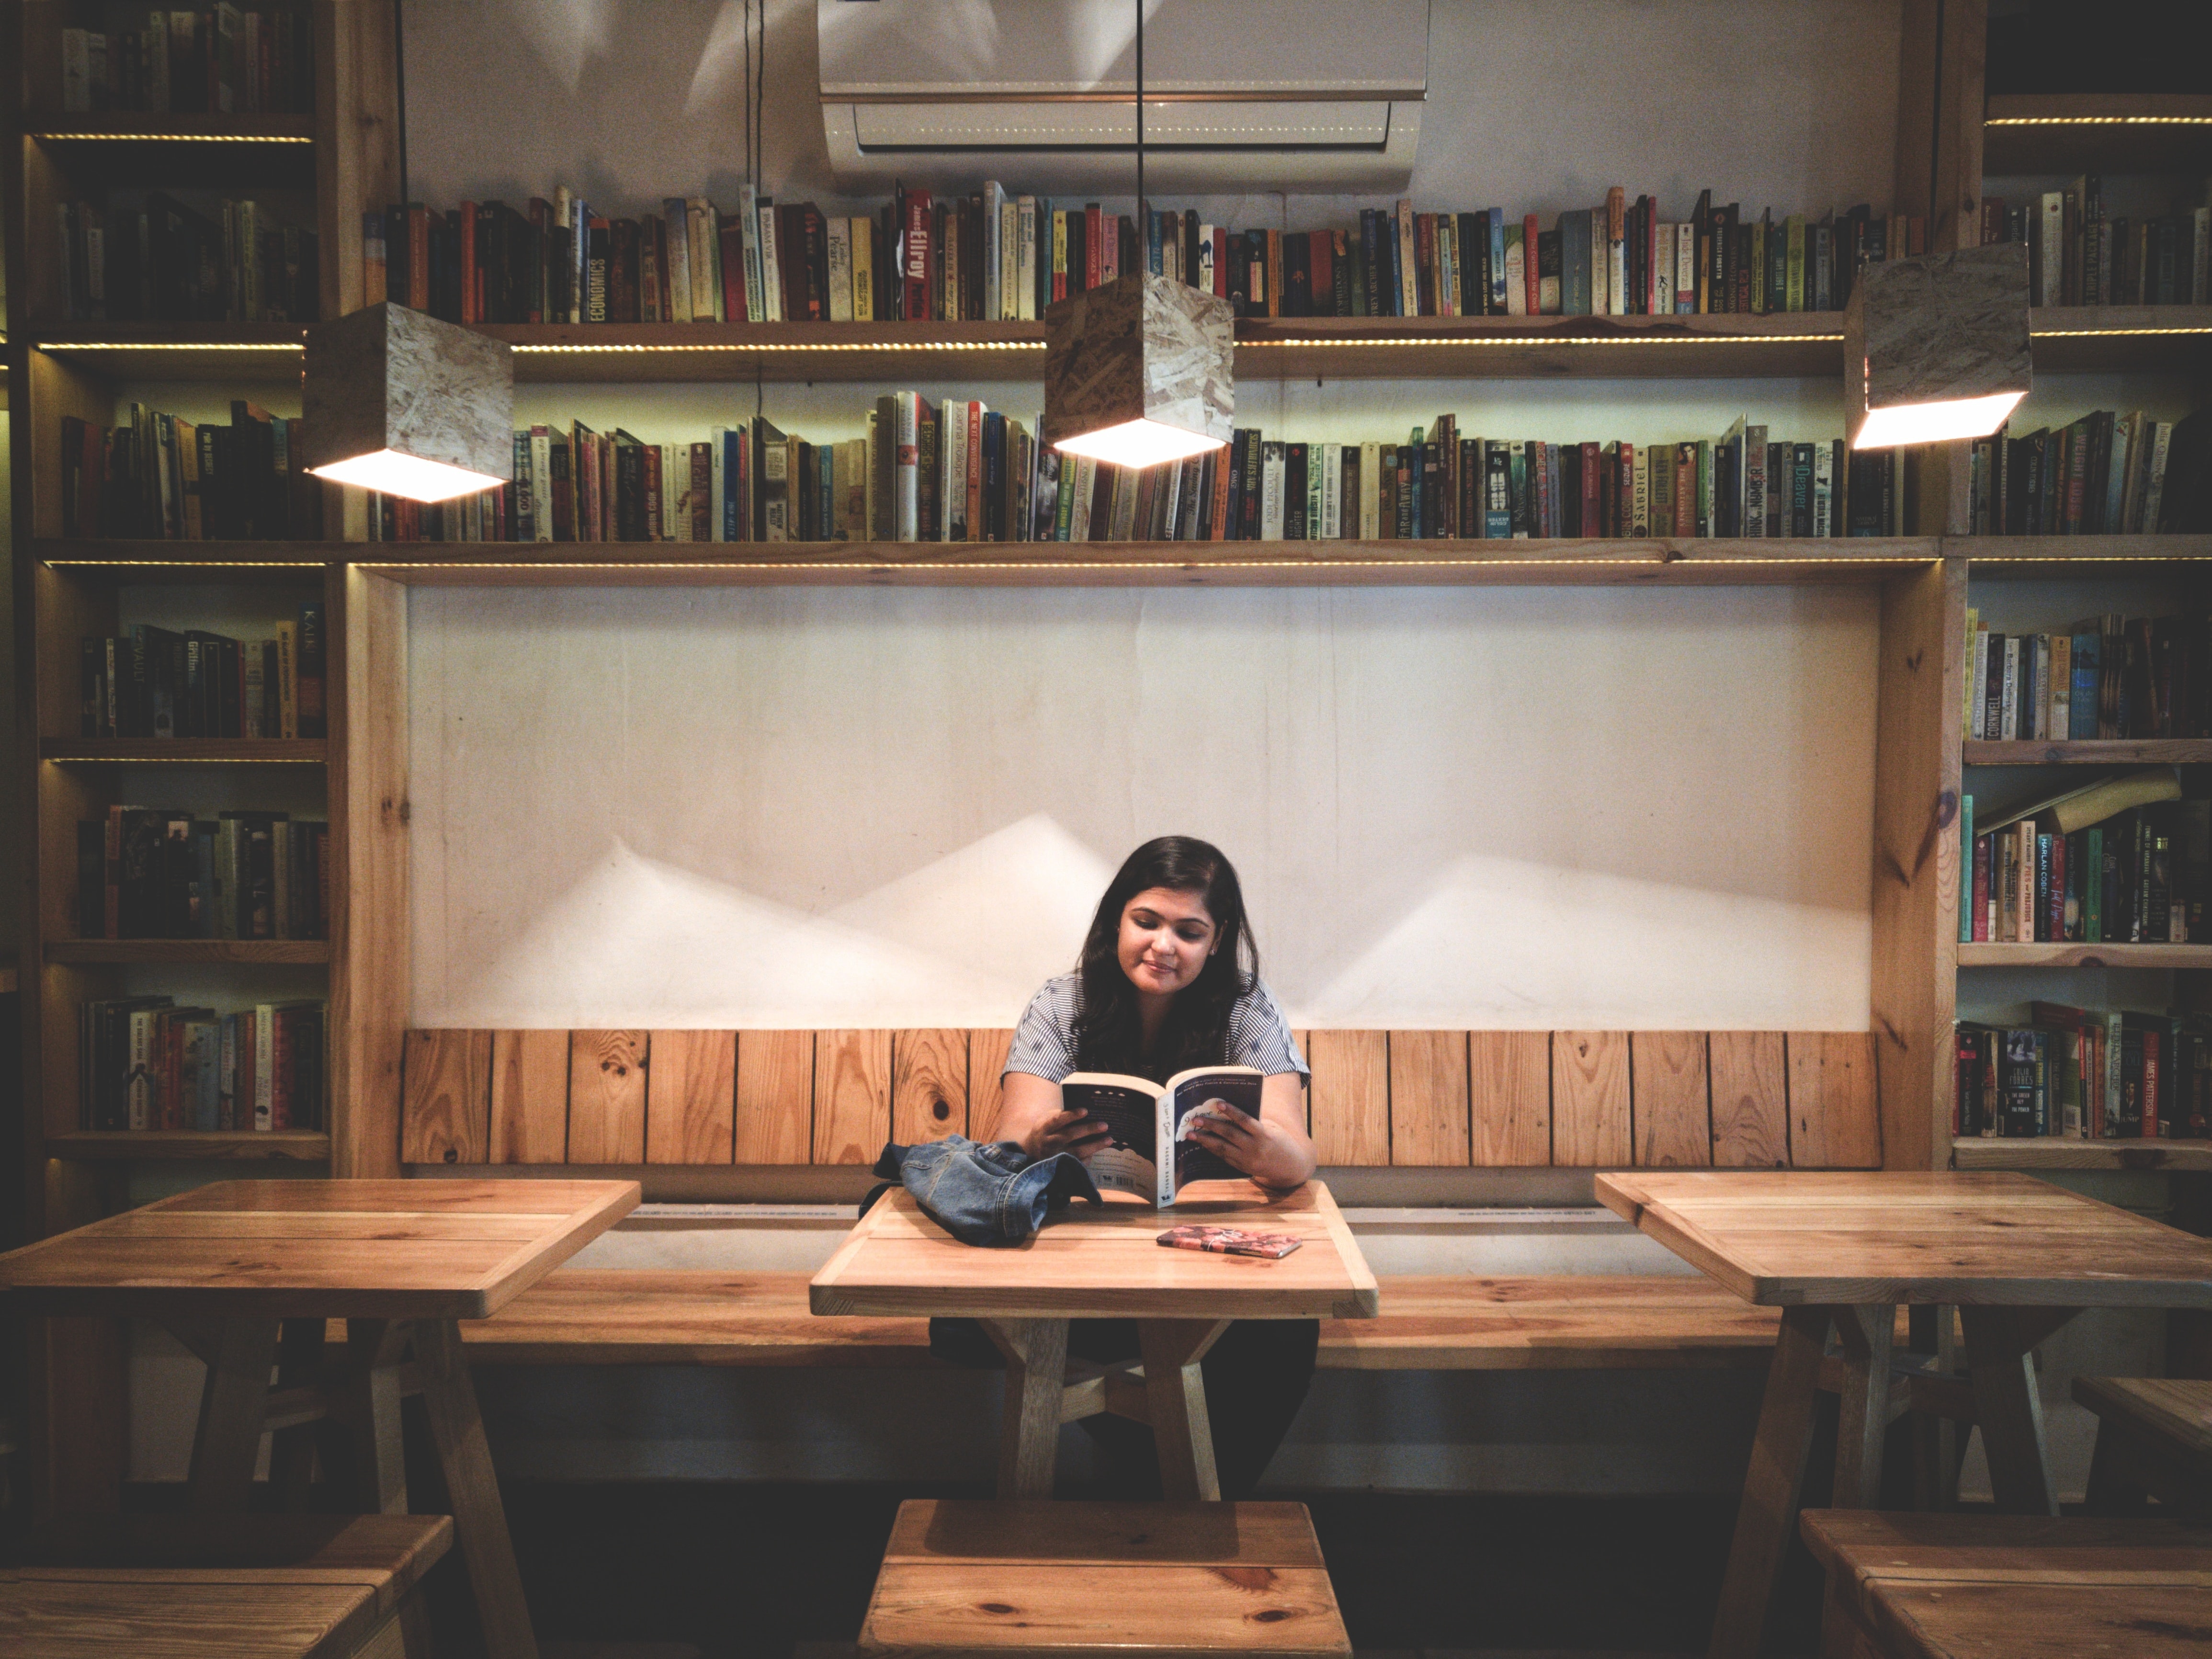 Decorative, person reading a book at a table, surrounded by books